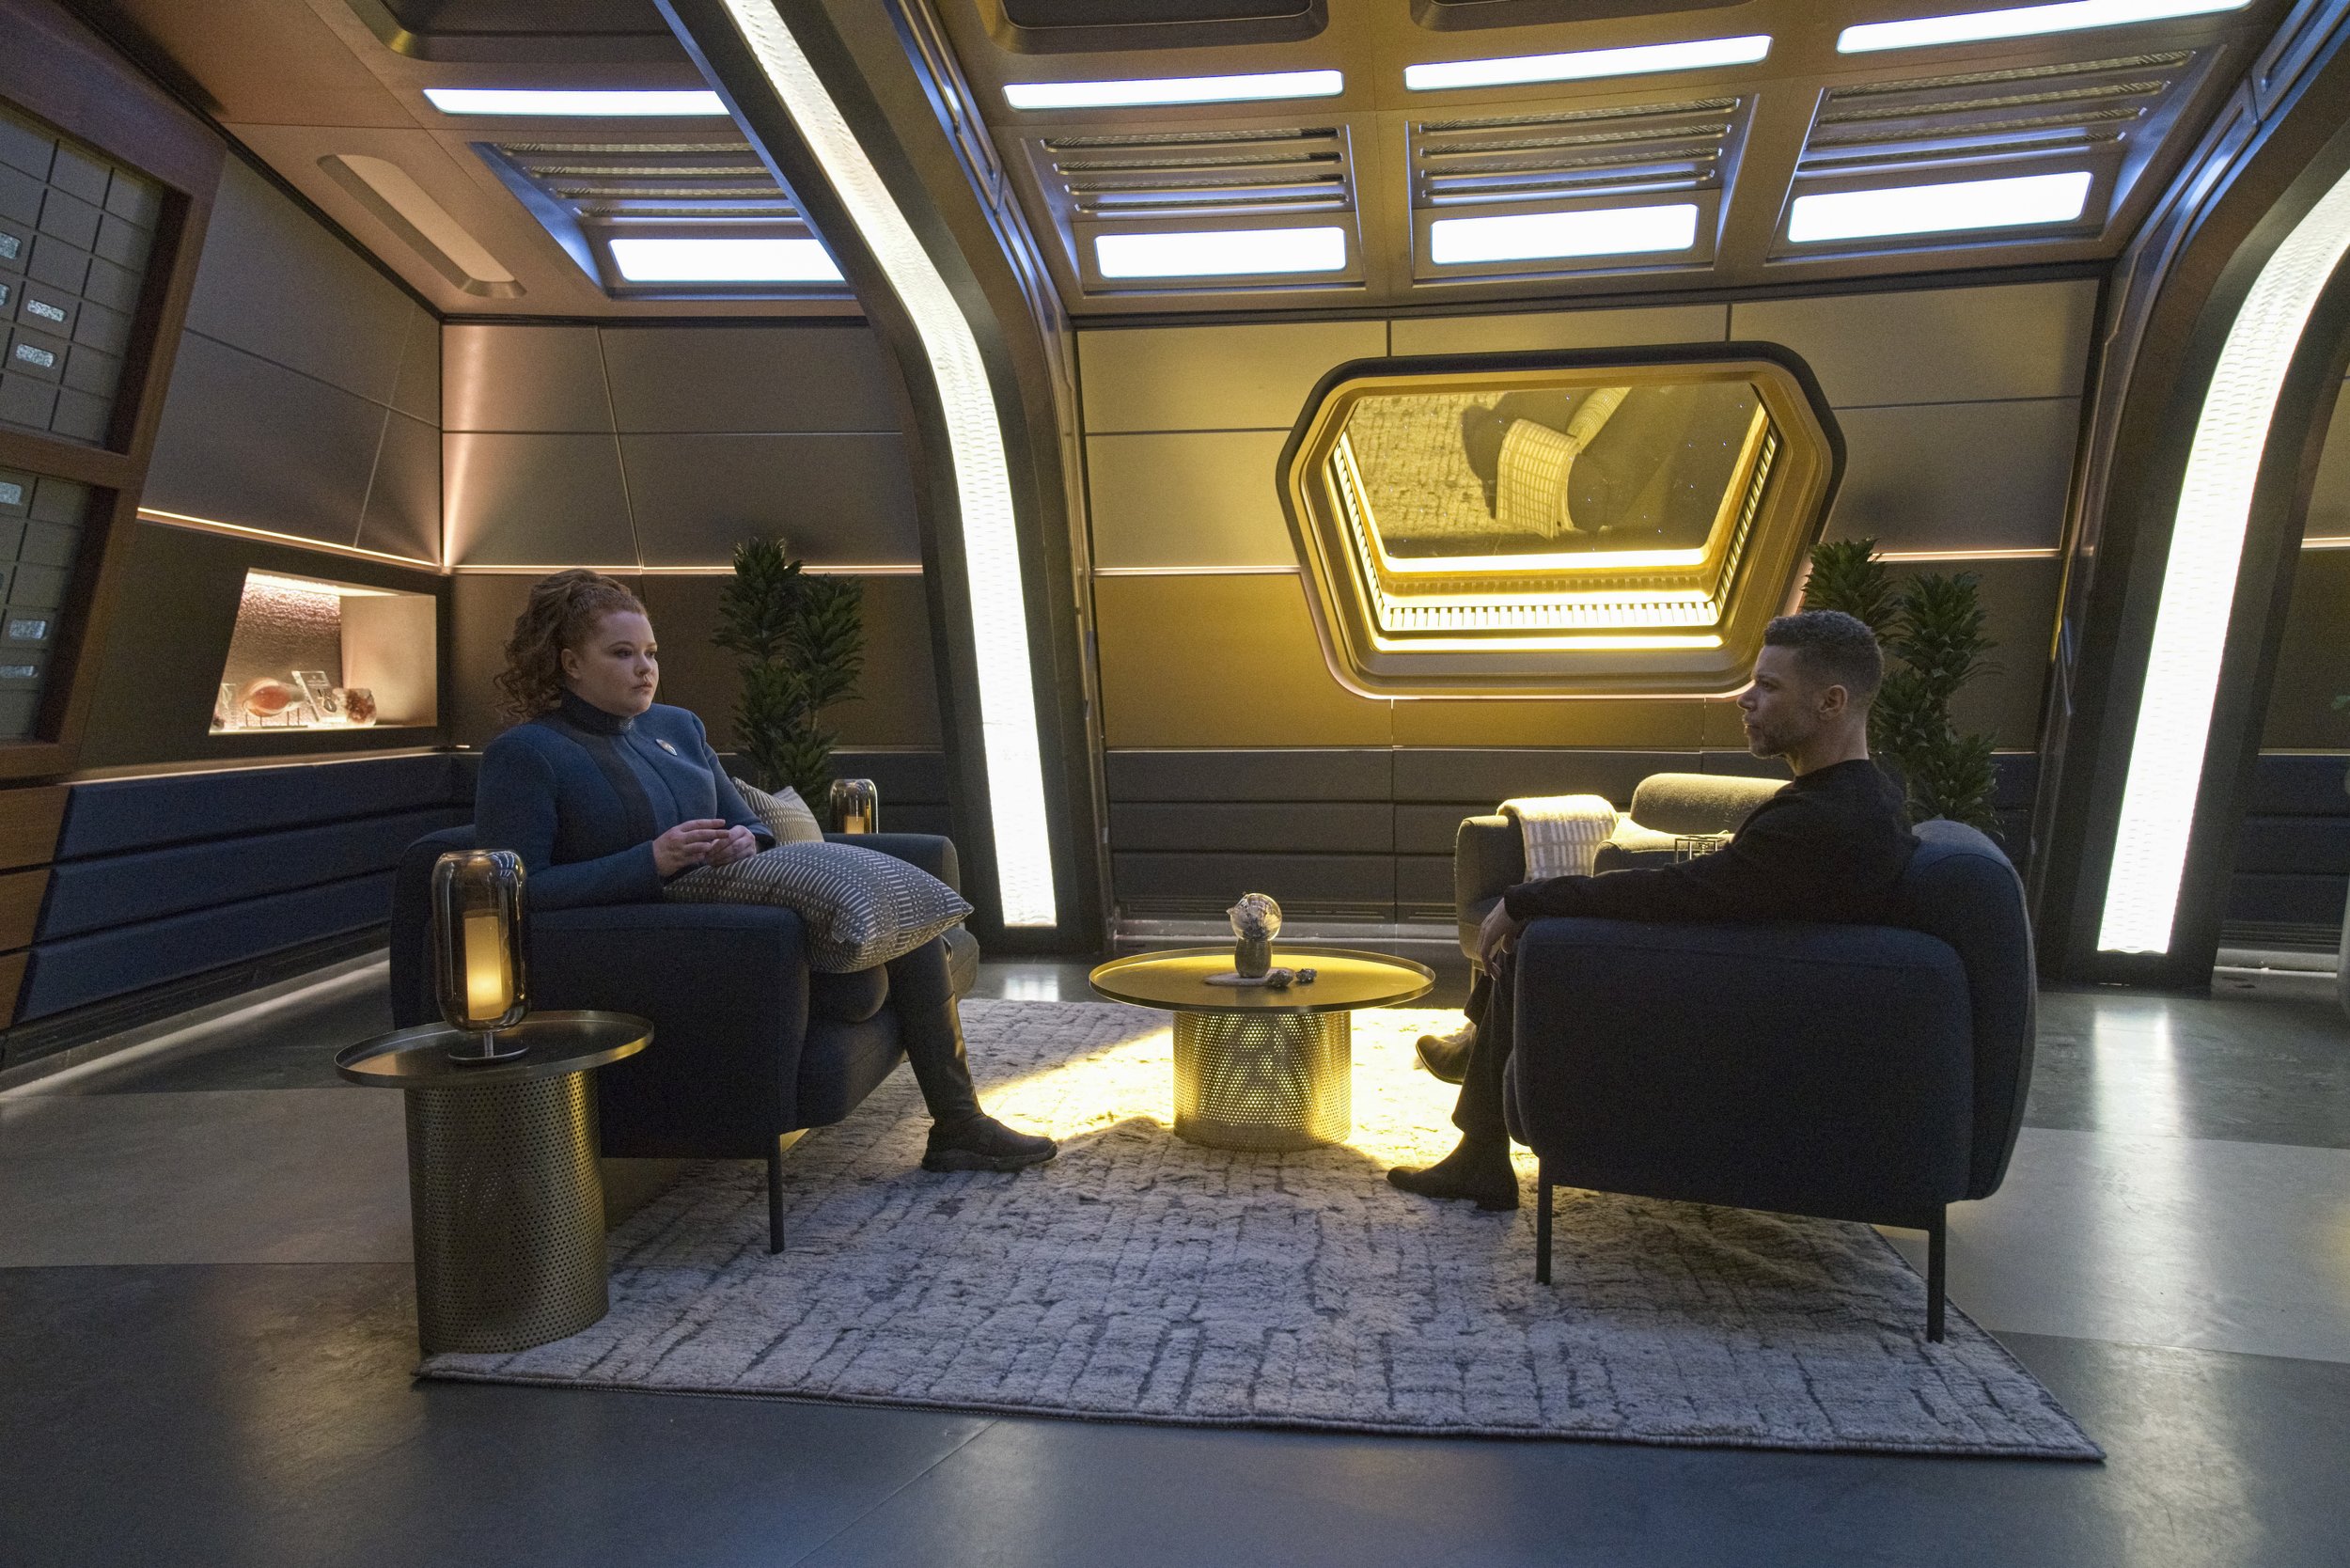   Pictured: Mary Wiseman as Tilly and Wilson Cruz as Culber of the Paramount+ original series STAR TREK: DISCOVERY. Photo Cr: Michael Gibson/Paramount+ © 2021 CBS Interactive. All Rights Reserved.  